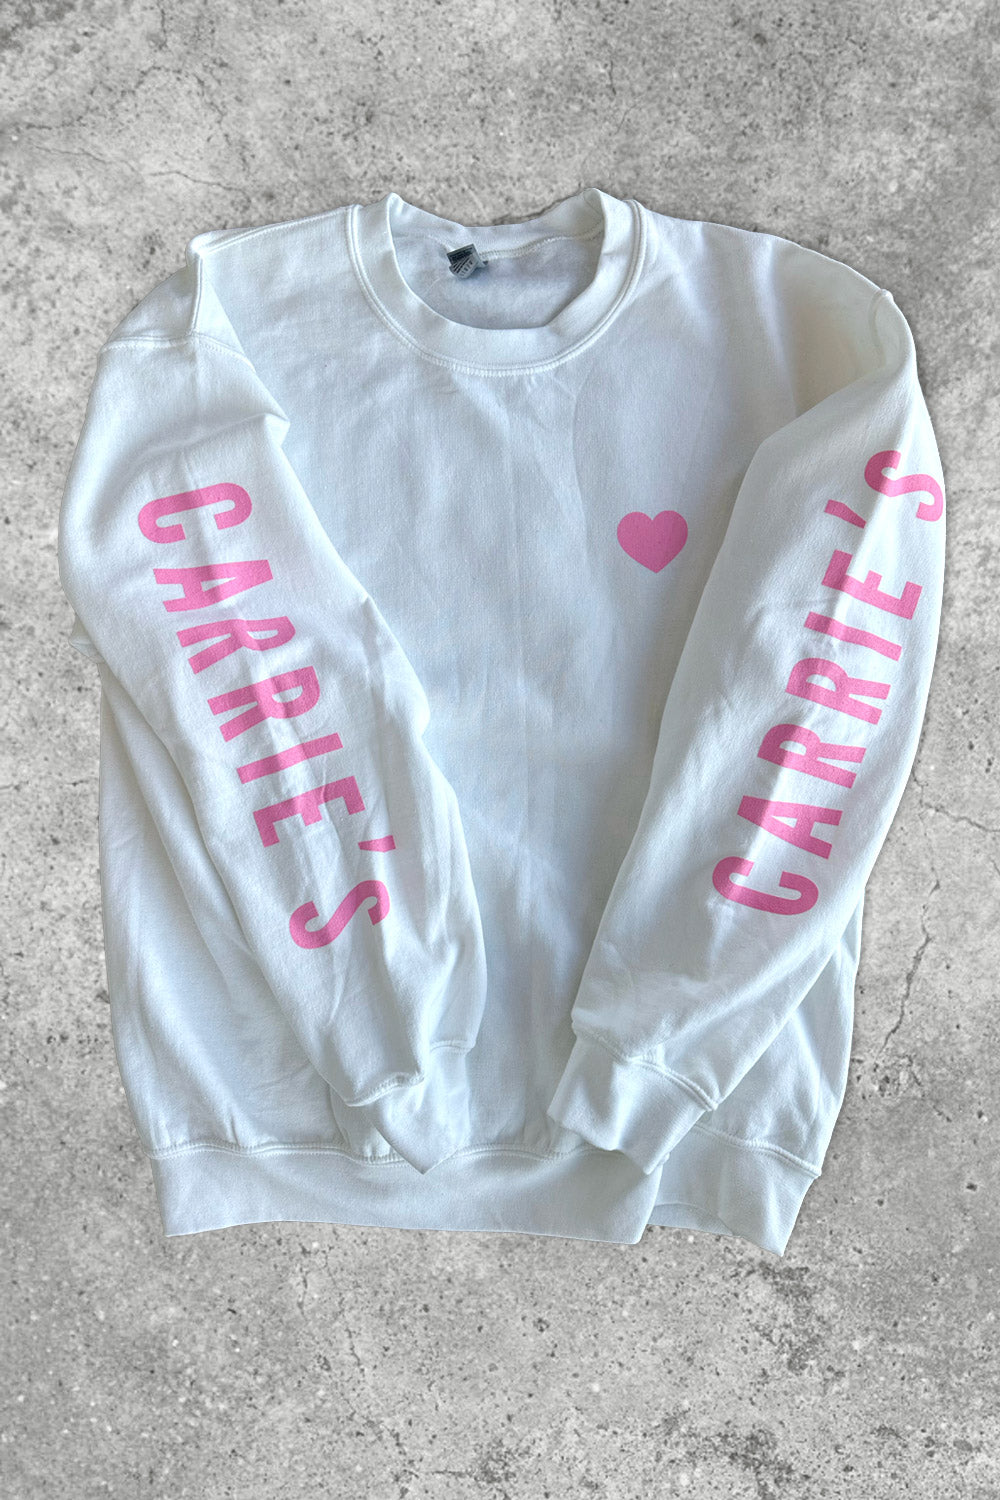 Carrie’s Heart Crewneck - White with Pink Text